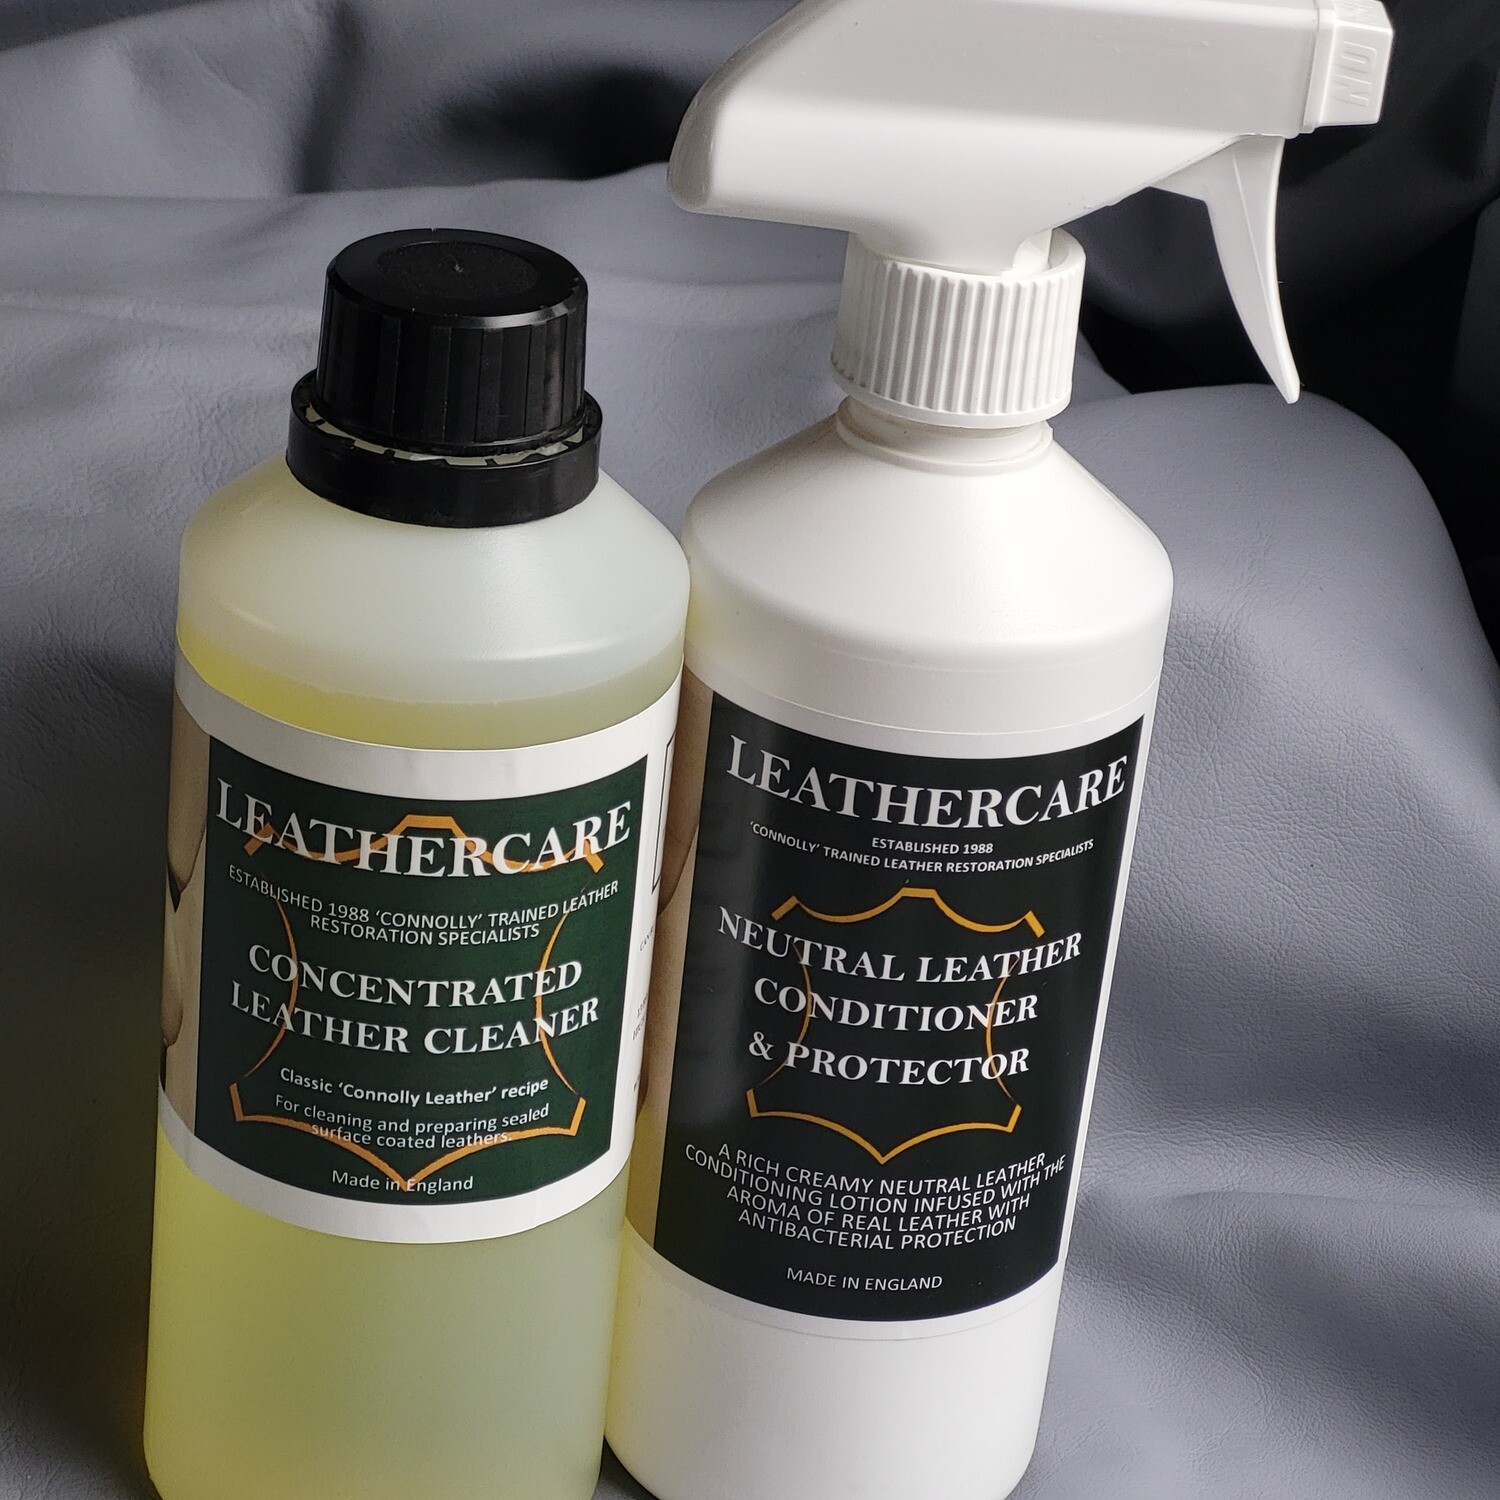 Neutral Leather Conditioner, Dye-guard & Antibacterial Protector (500ml) & Concentrated Leather Cleaner (500ml)